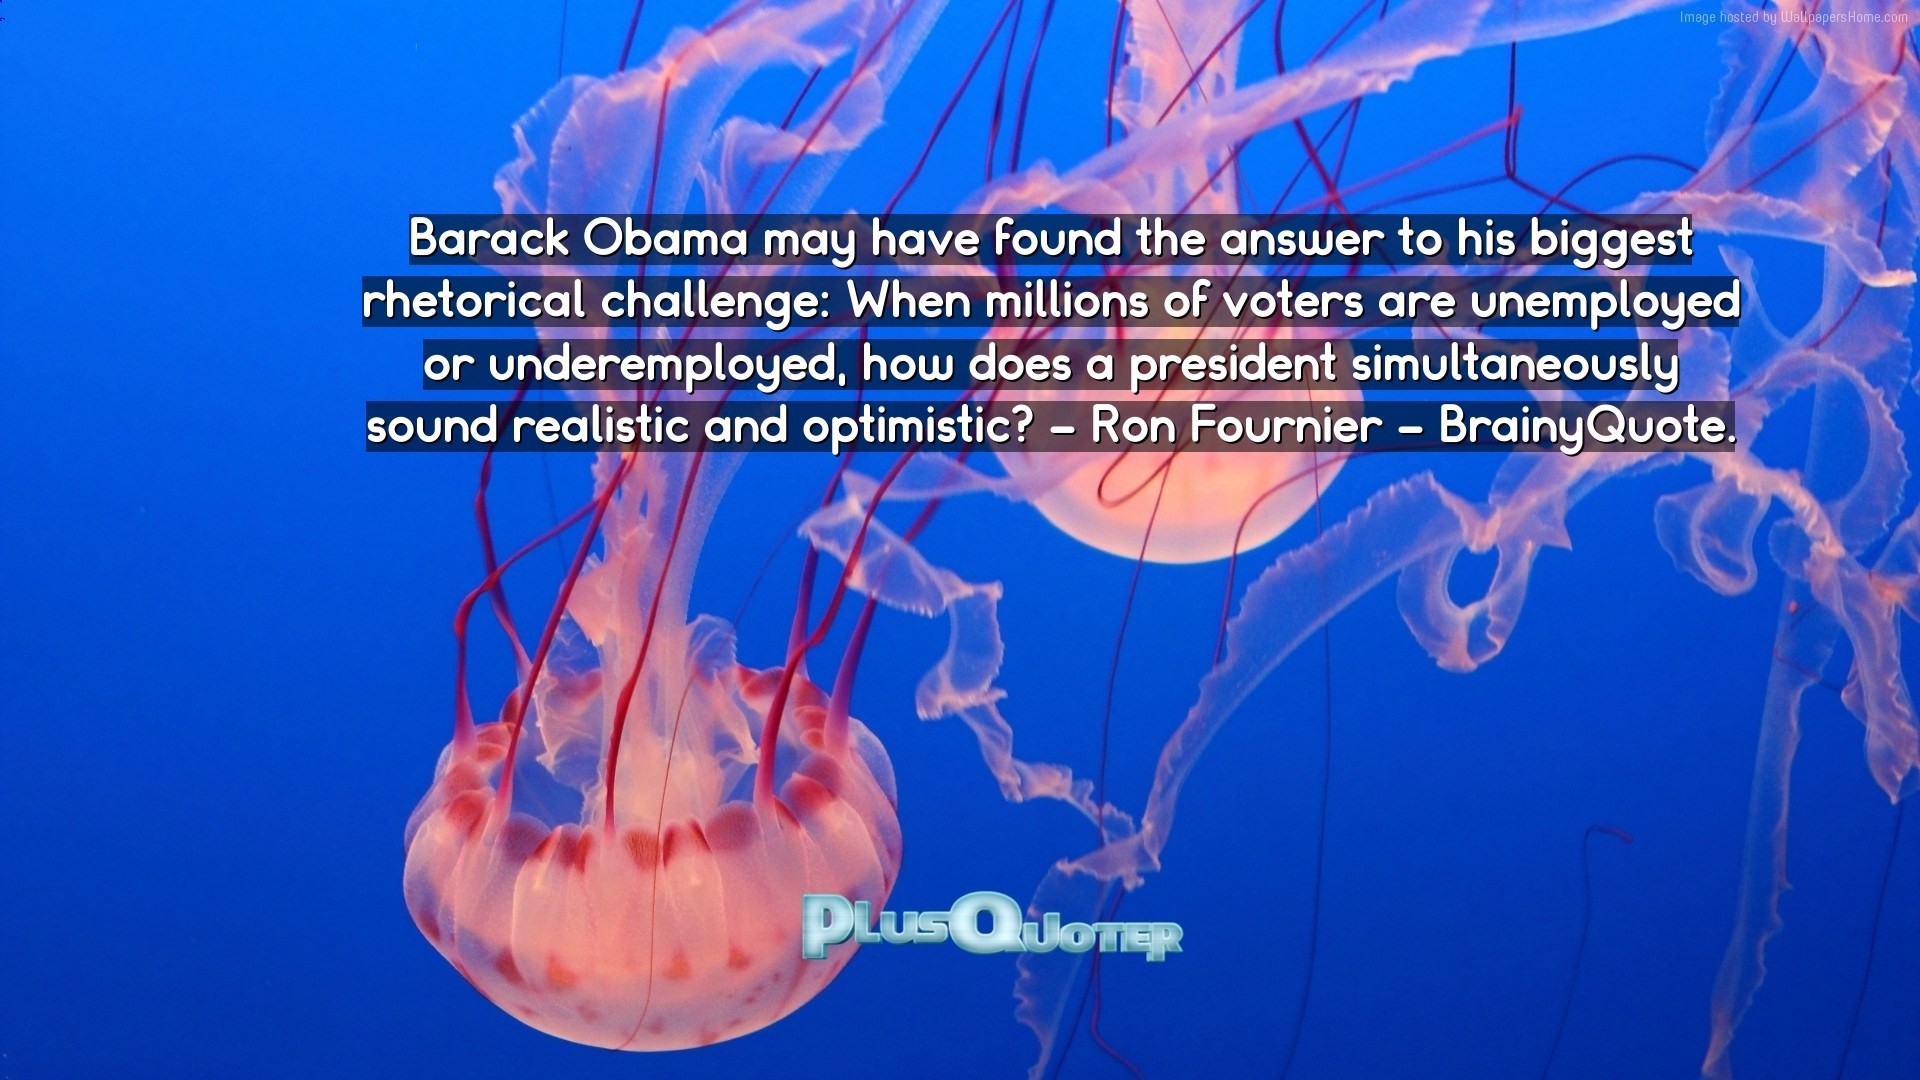 1920x1080 Download Wallpaper with inspirational Quotes- "Barack Obama may have found  the answer to his. “